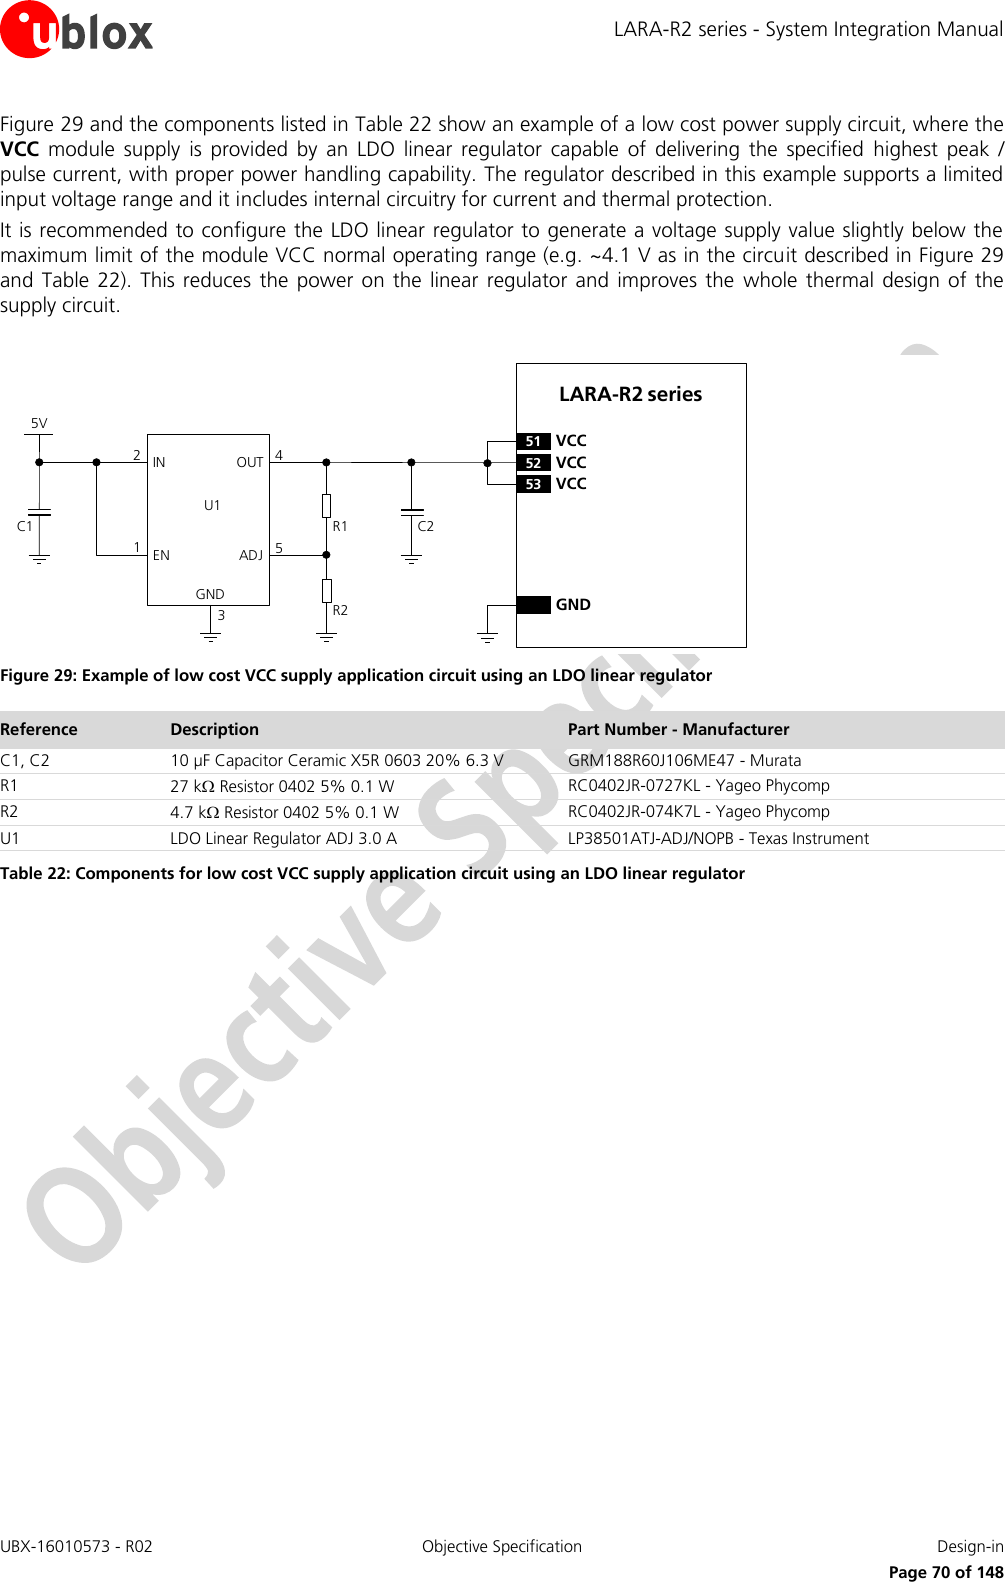 LARA-R2 series - System Integration Manual UBX-16010573 - R02  Objective Specification  Design-in     Page 70 of 148 Figure 29 and the components listed in Table 22 show an example of a low cost power supply circuit, where the VCC  module  supply  is  provided  by  an  LDO  linear  regulator  capable  of  delivering  the  specified  highest  peak  / pulse current, with proper power handling capability. The regulator described in this example supports a limited input voltage range and it includes internal circuitry for current and thermal protection. It is recommended to configure the LDO linear regulator to generate a voltage supply value slightly below the maximum limit of the module VCC normal operating range (e.g. ~4.1 V as in the circuit described in Figure 29 and  Table  22).  This reduces  the power  on  the  linear  regulator and  improves  the  whole  thermal  design  of  the supply circuit.  5VC1IN OUTADJGND12453C2R1R2U1ENLARA-R2 series52 VCC53 VCC51 VCCGND Figure 29: Example of low cost VCC supply application circuit using an LDO linear regulator Reference Description Part Number - Manufacturer C1, C2 10 µF Capacitor Ceramic X5R 0603 20% 6.3 V GRM188R60J106ME47 - Murata R1 27 k Resistor 0402 5% 0.1 W RC0402JR-0727KL - Yageo Phycomp R2 4.7 k Resistor 0402 5% 0.1 W RC0402JR-074K7L - Yageo Phycomp U1 LDO Linear Regulator ADJ 3.0 A LP38501ATJ-ADJ/NOPB - Texas Instrument Table 22: Components for low cost VCC supply application circuit using an LDO linear regulator  